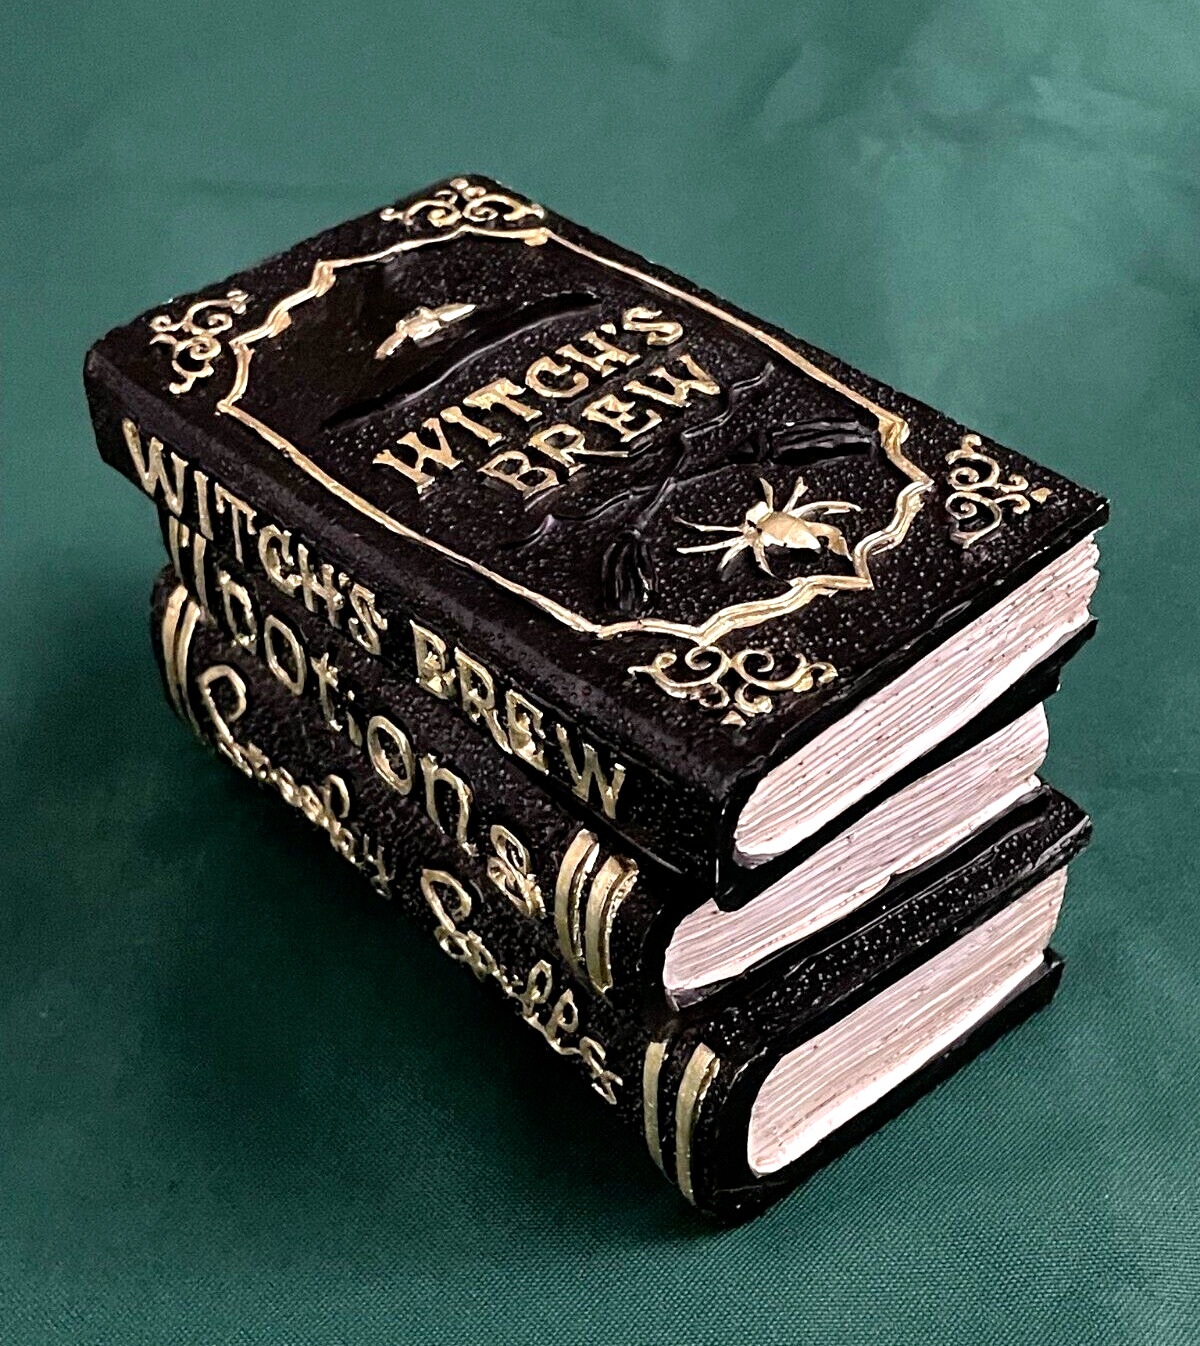 Witch Stacked Books Spellbook Spooky Potions Goth Halloween Home Decor 5 x 3 1/2